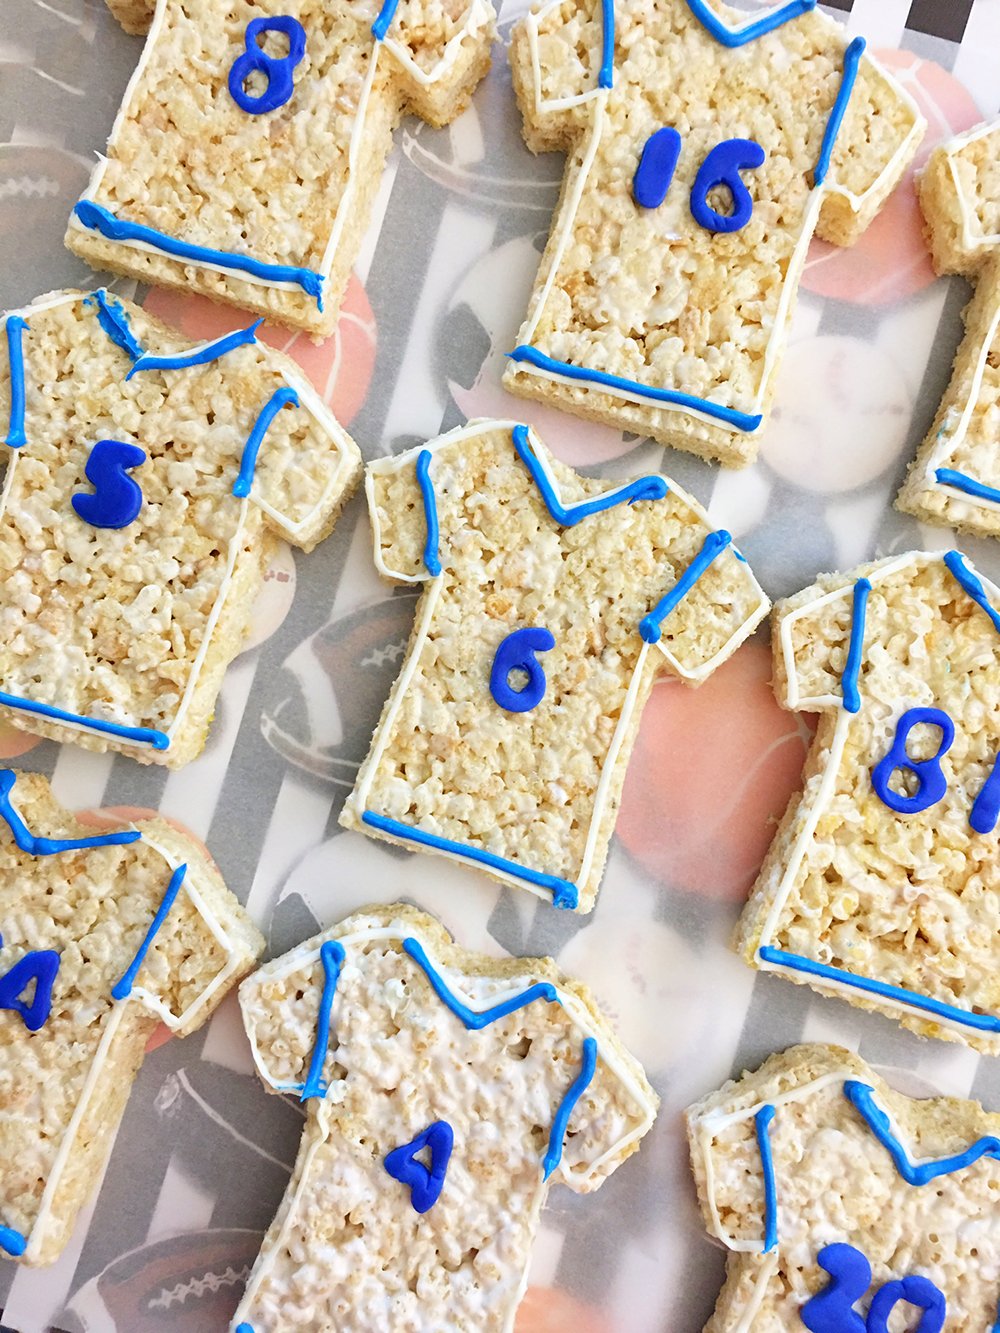 Your athletes will gobble up these sports jersey rice crispy treats!